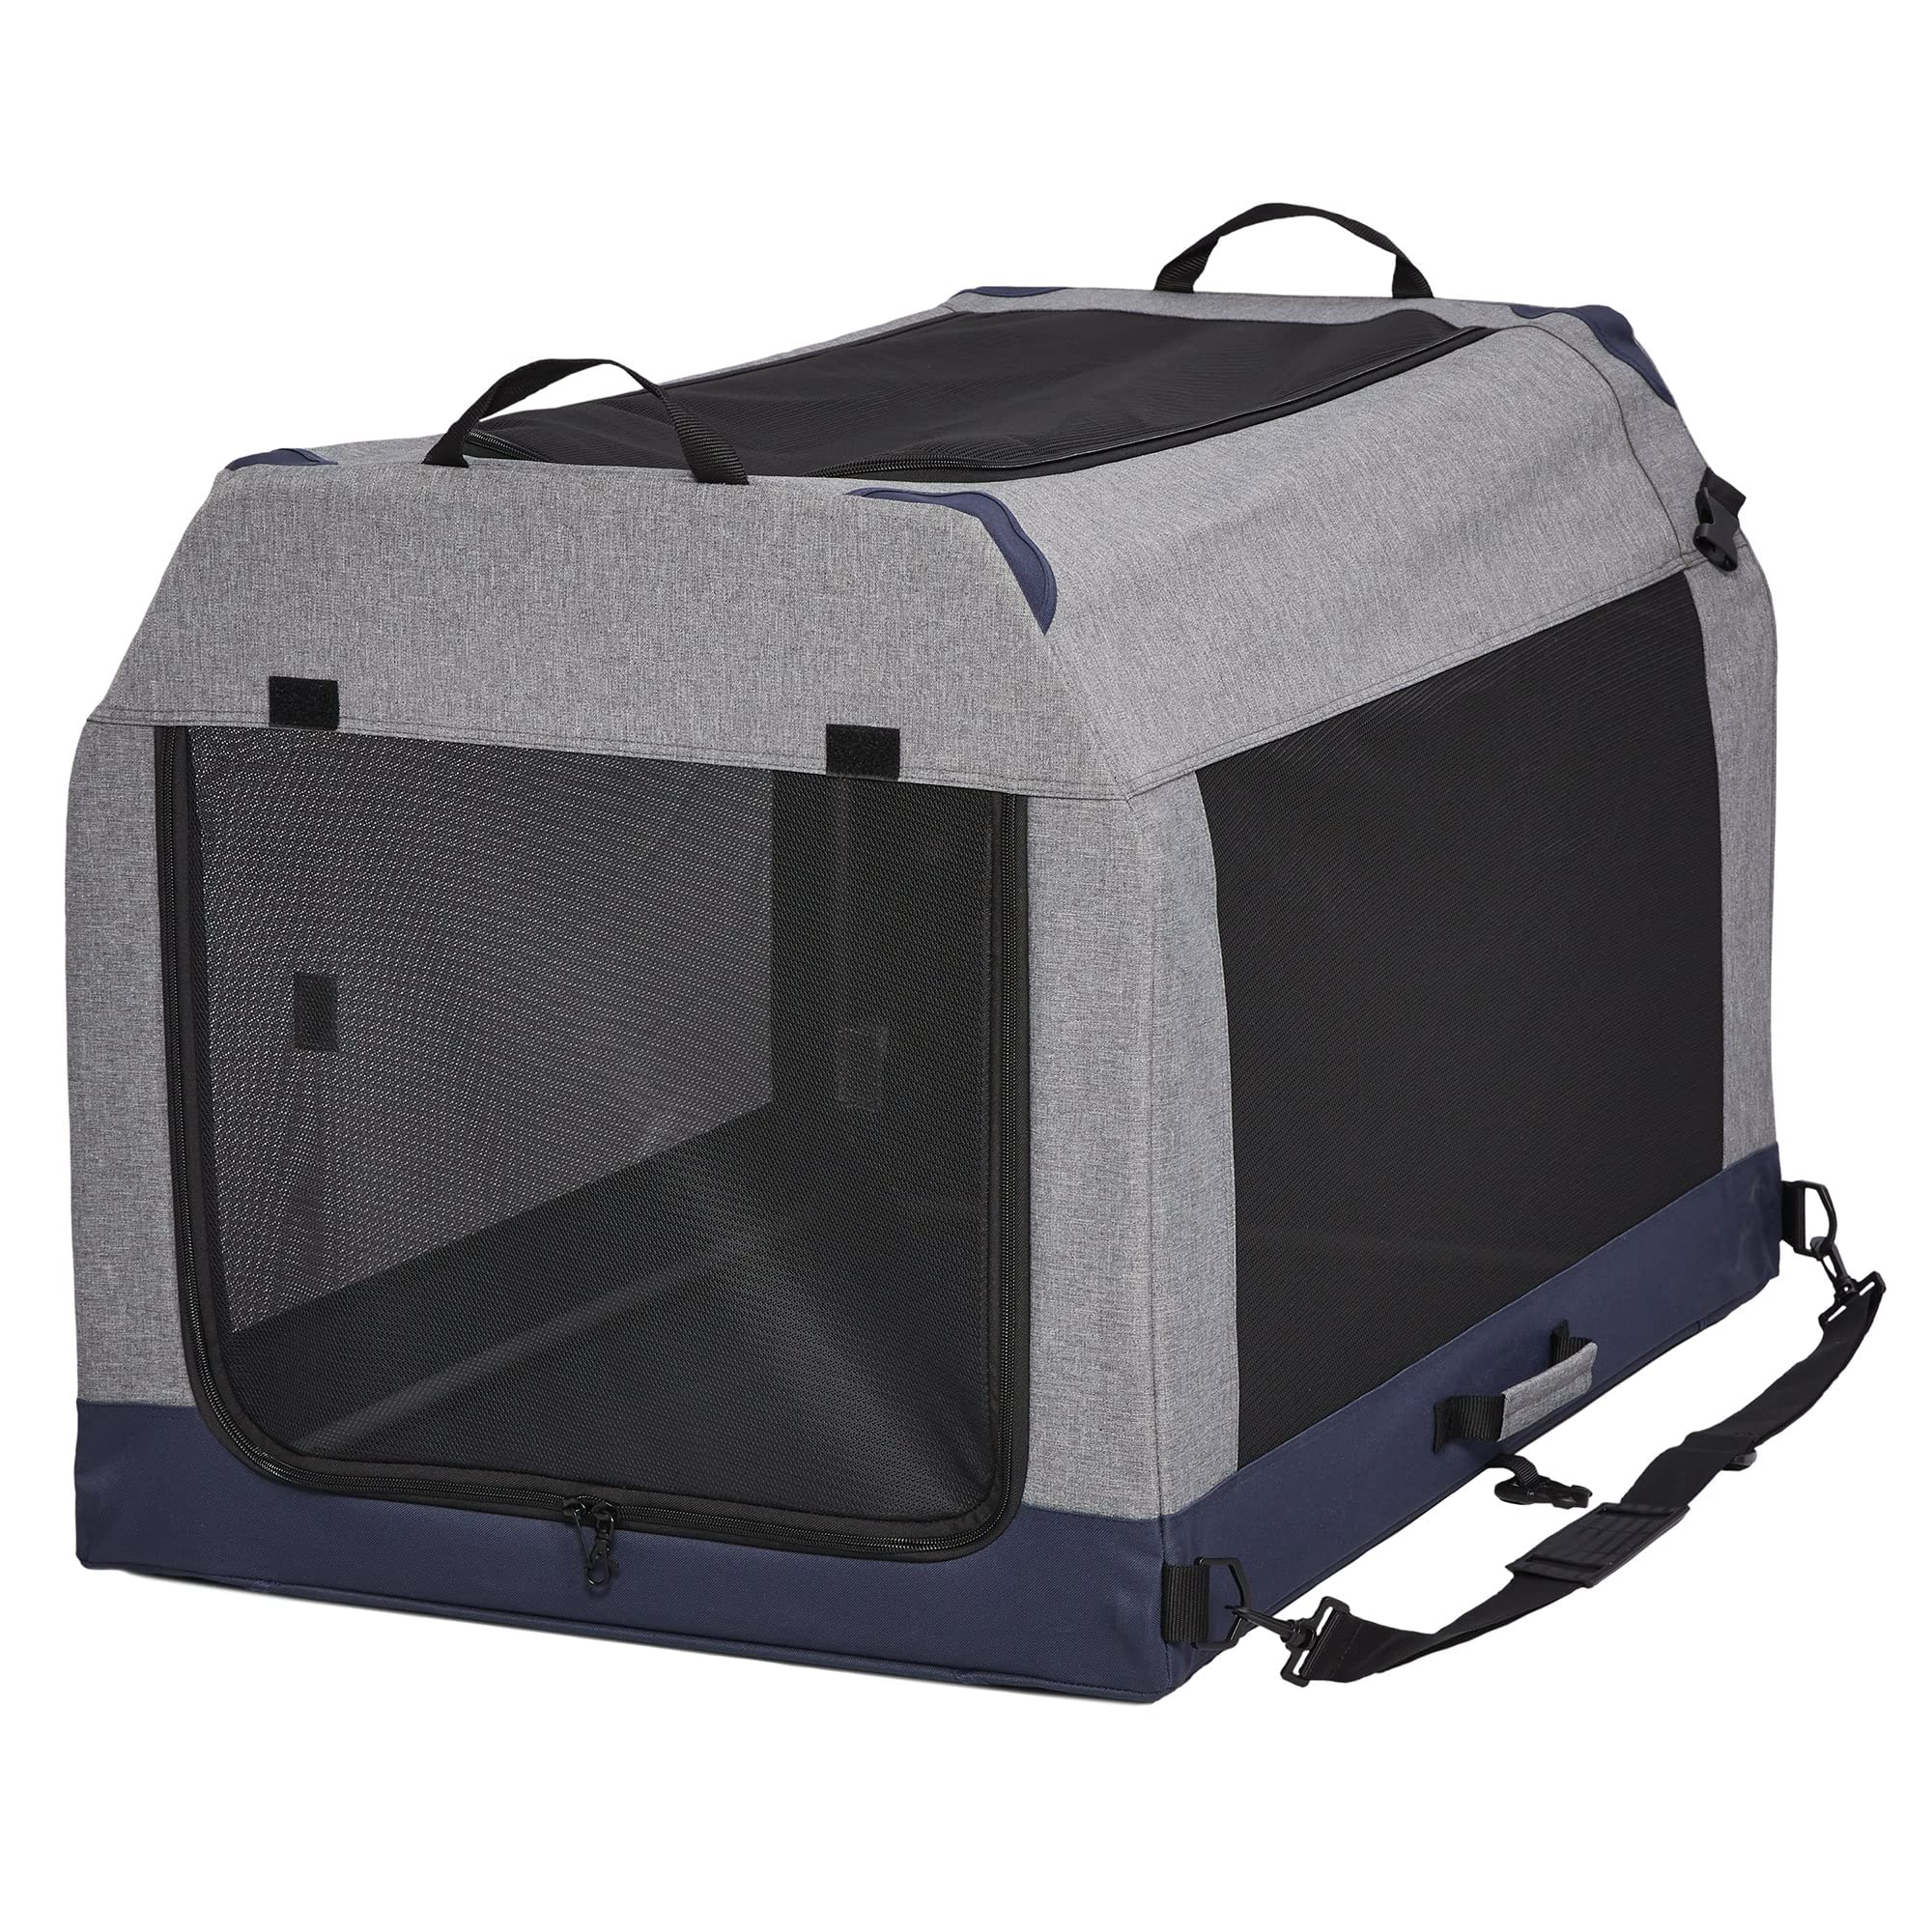 Midwest Canine Camper Pop-Up Tent Soft Folding Dog Crate - Gray - 36